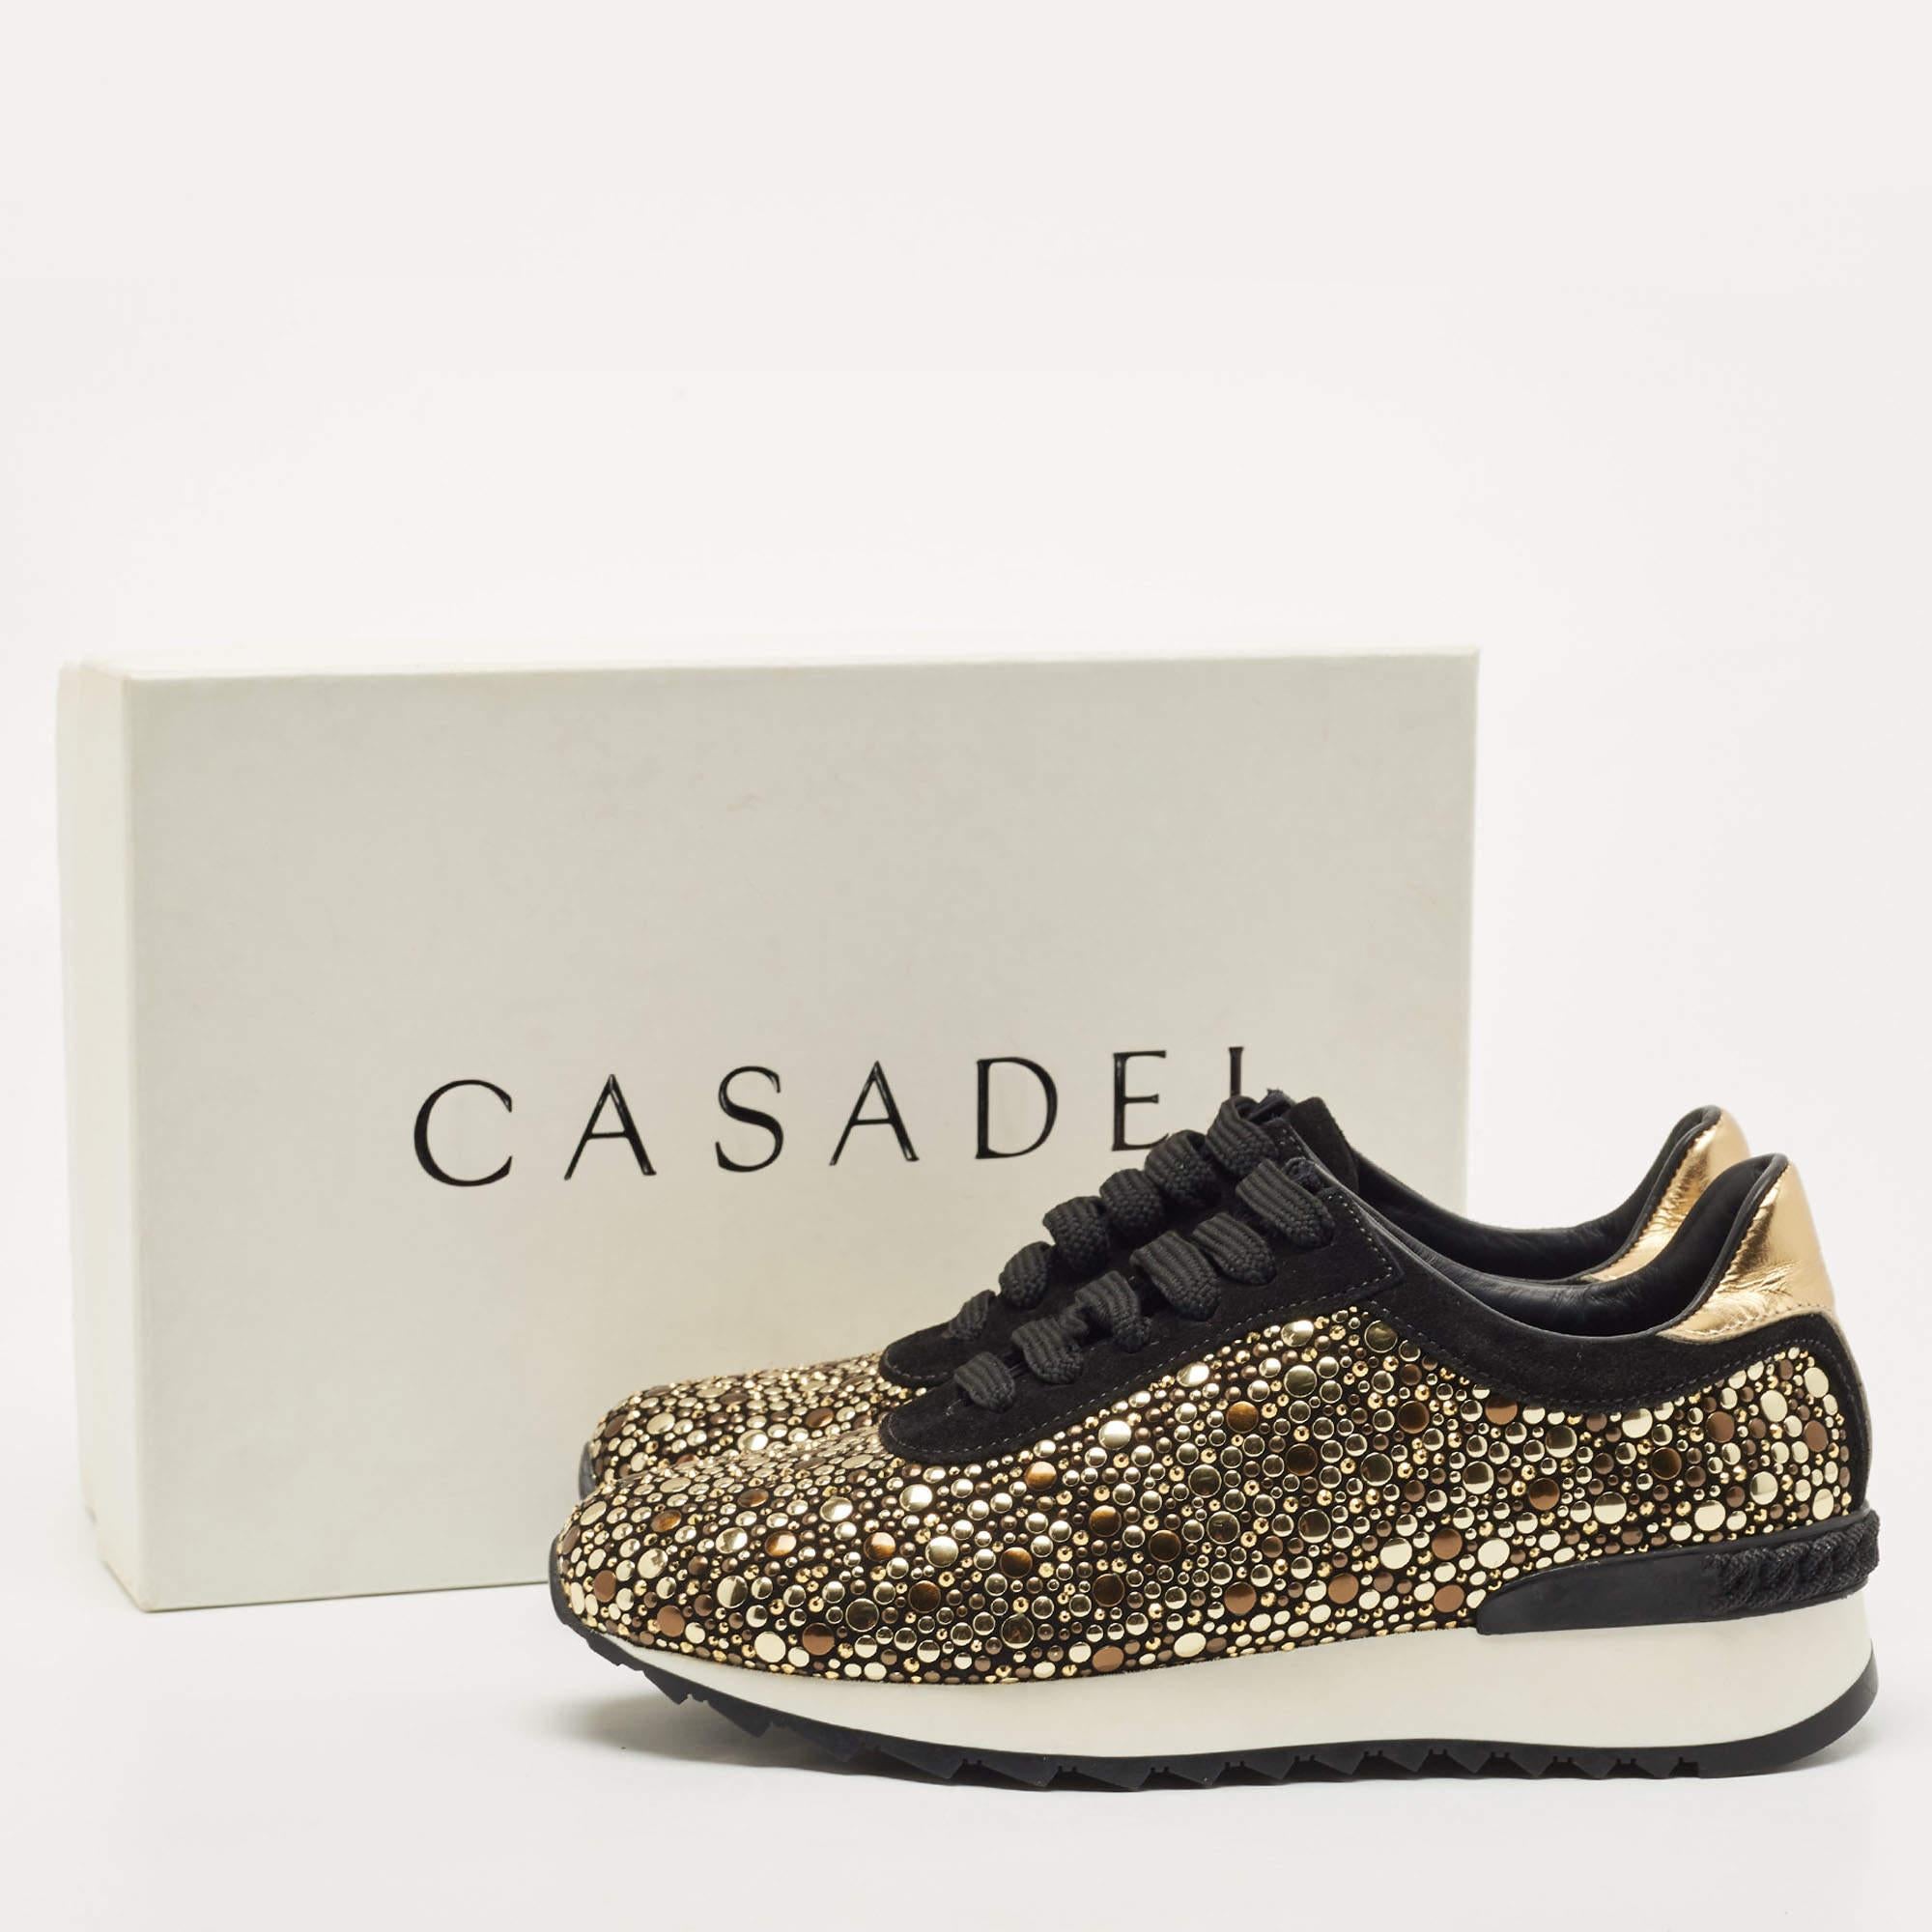 Casadei Black/Gold Suede and Leather Studded Low Top Sneakers Size 37 For Sale 2